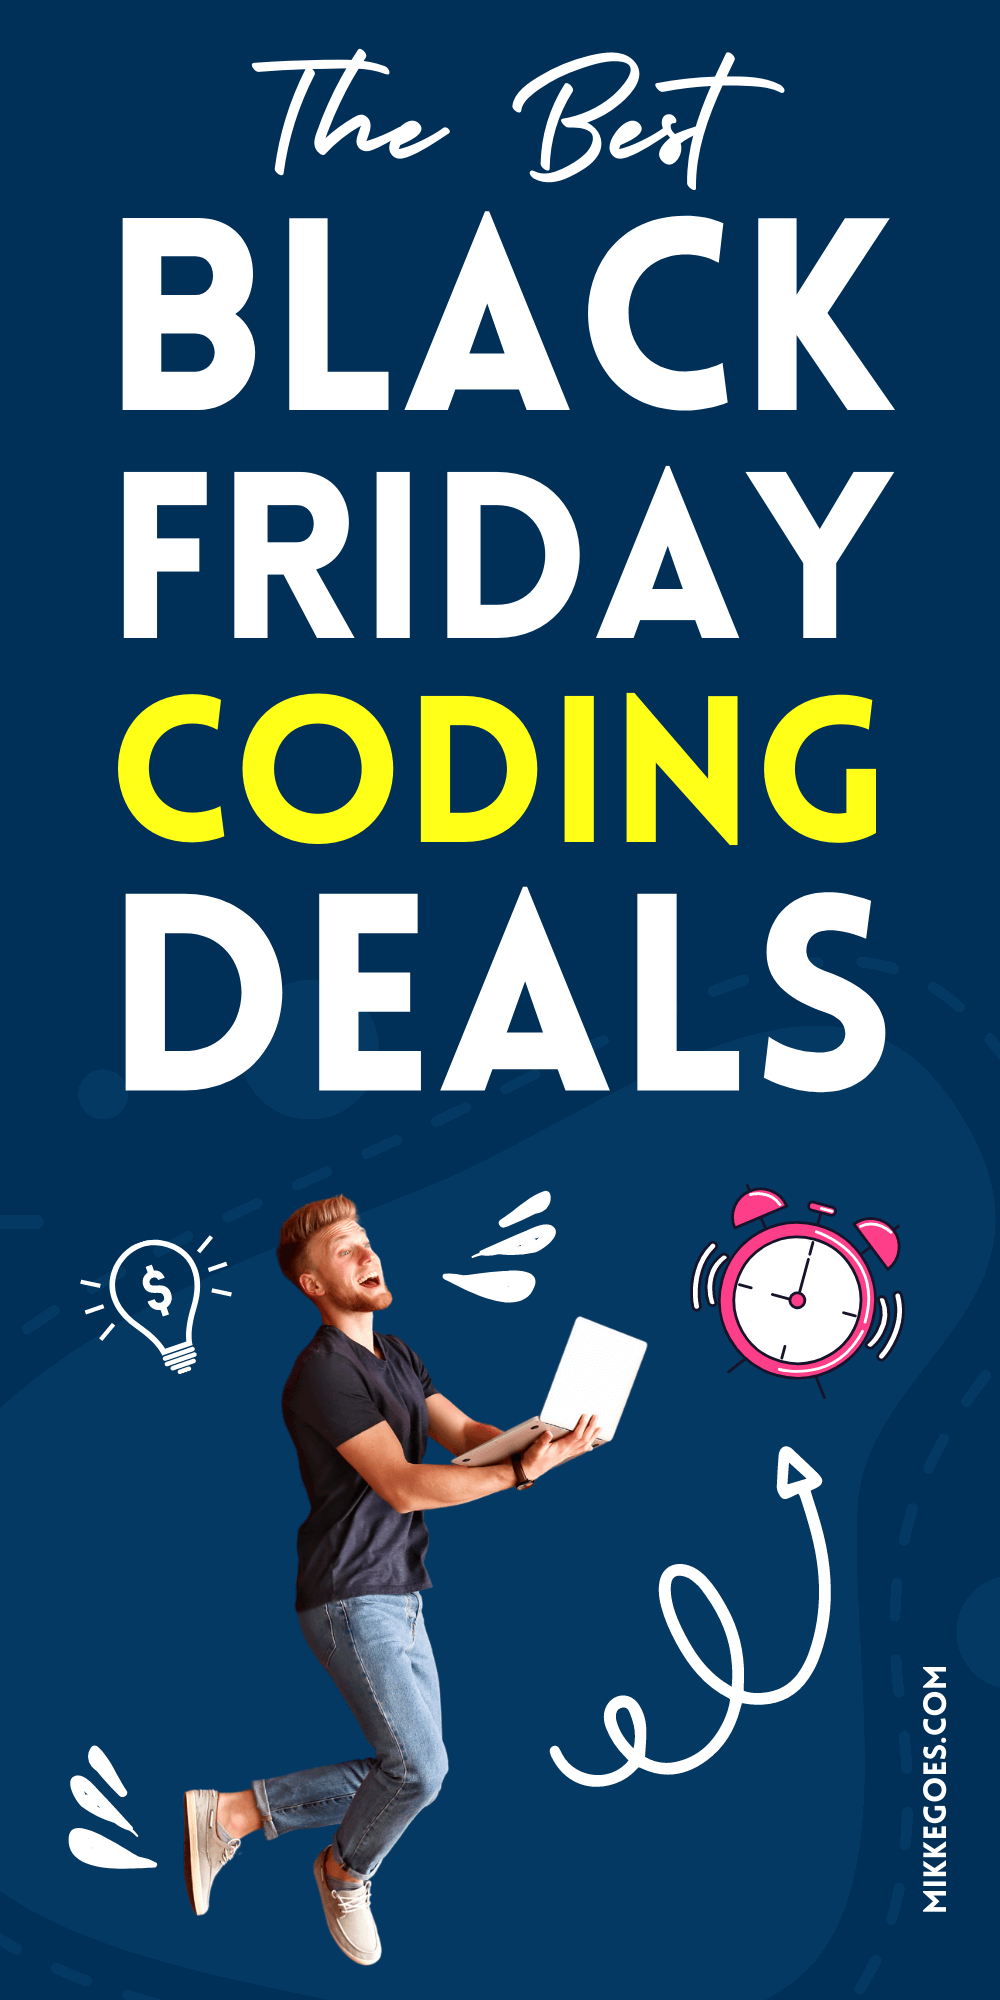 The best Black Friday coding and teh deals